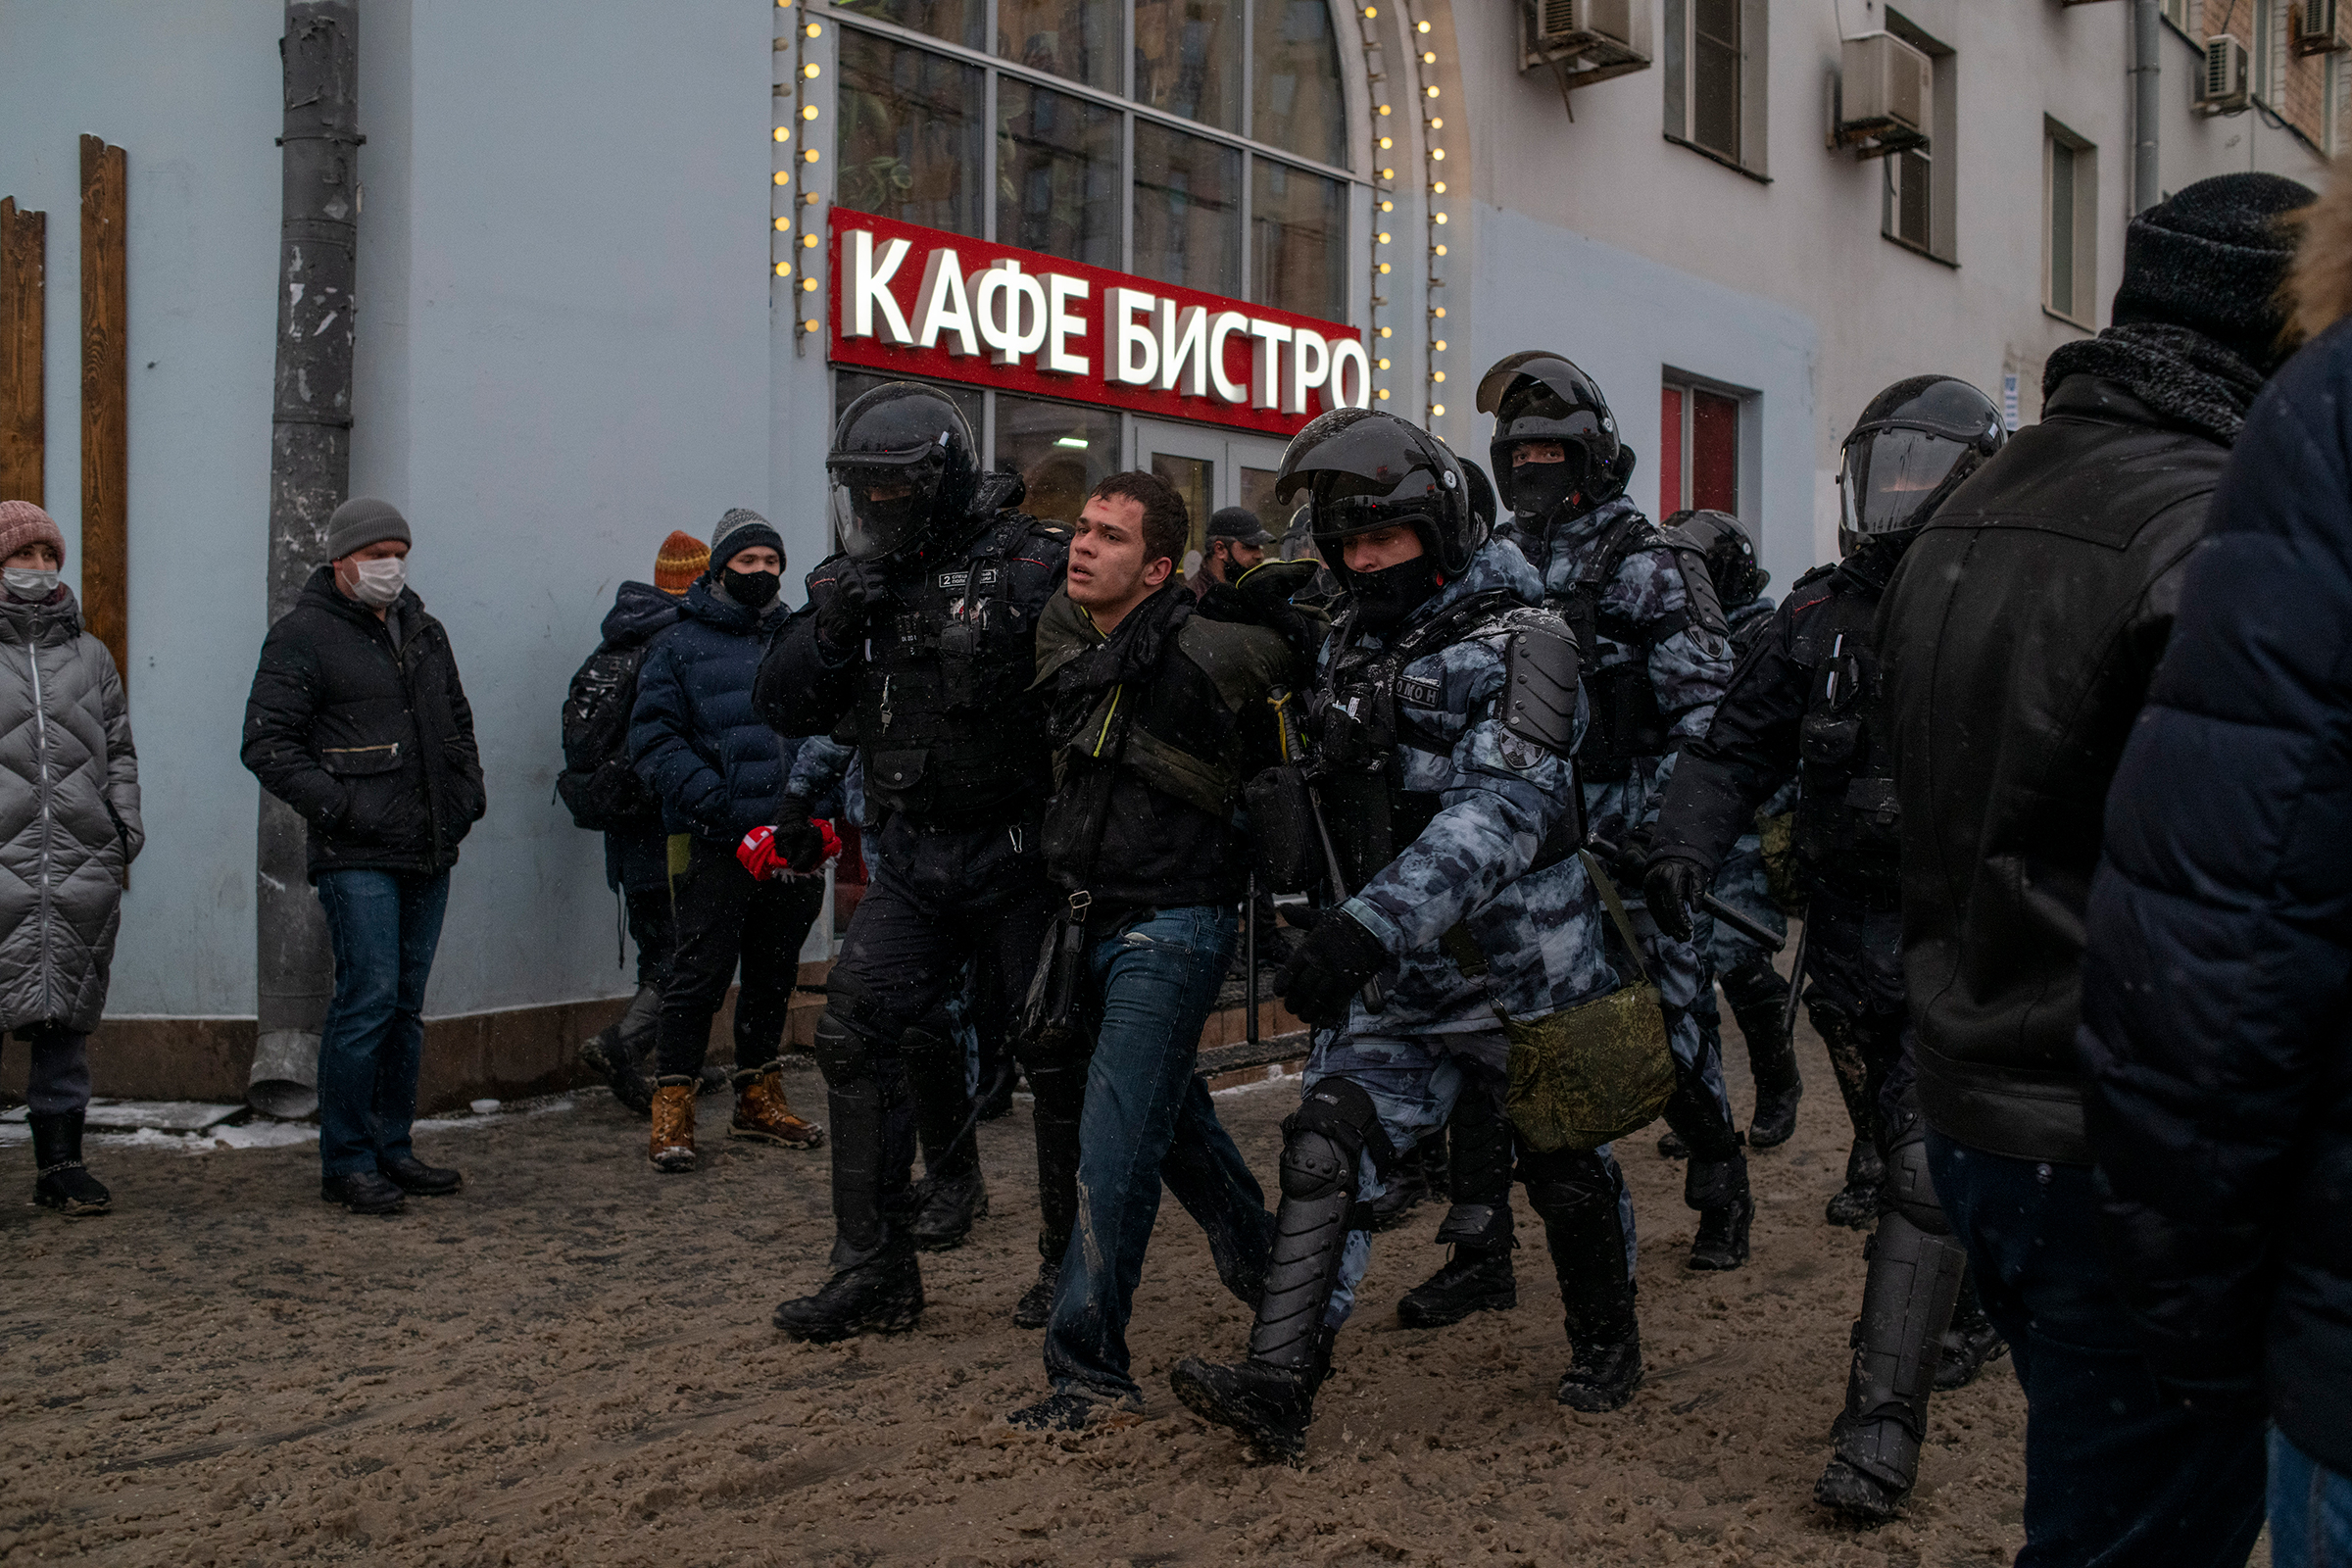 A protester is detained in Moscow on Jan. 31. (Yuri Kozyrev—NOOR for TIME)